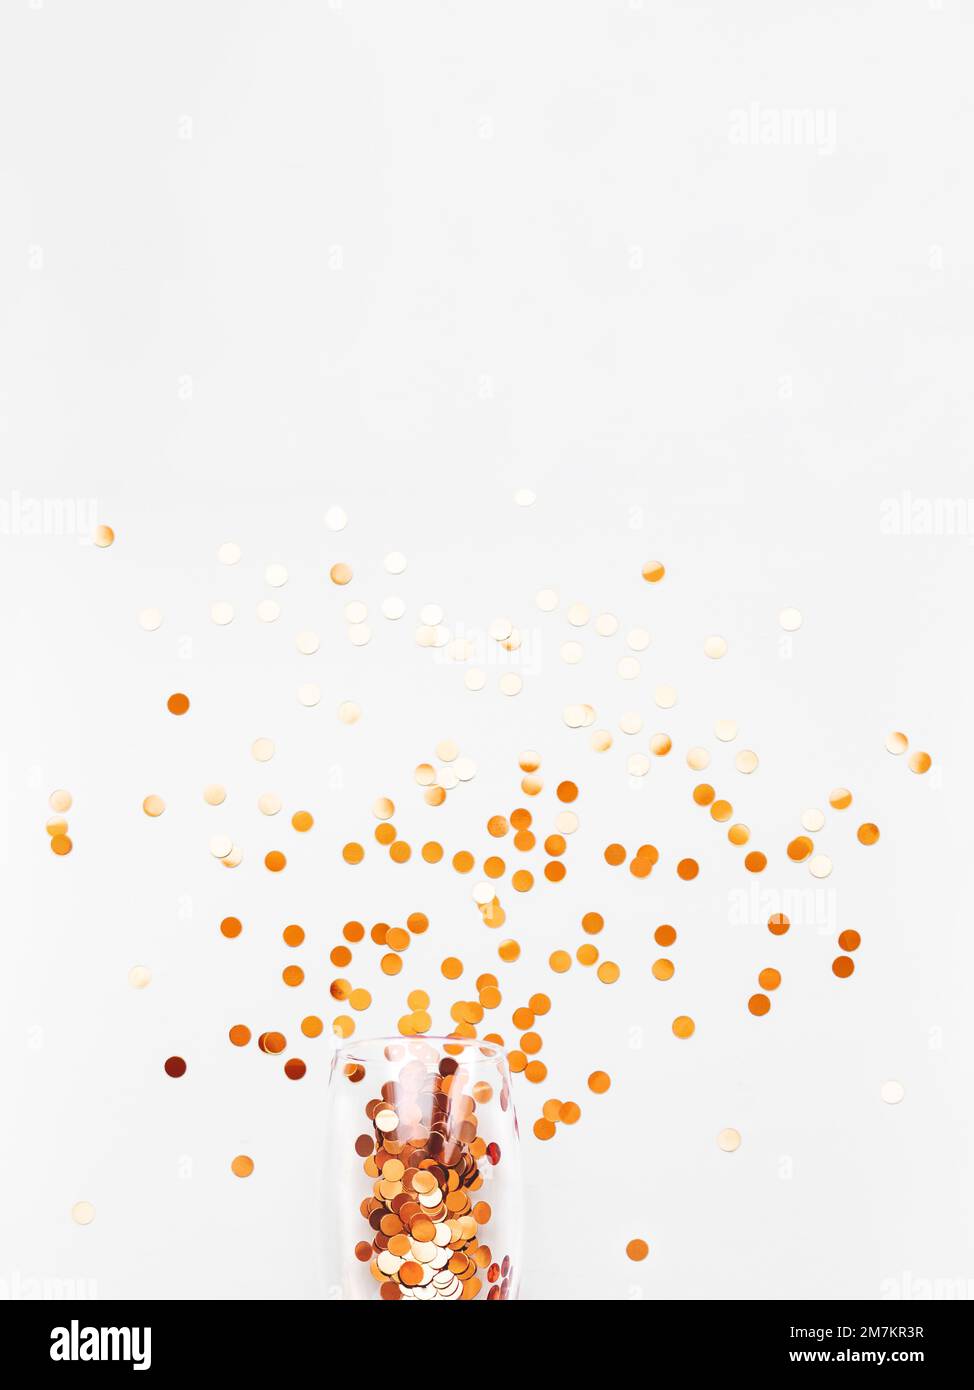 Top view on transparent wine glass with exploded firework of golden spangles. Festive copy space with crockery on white background. Stock Photo